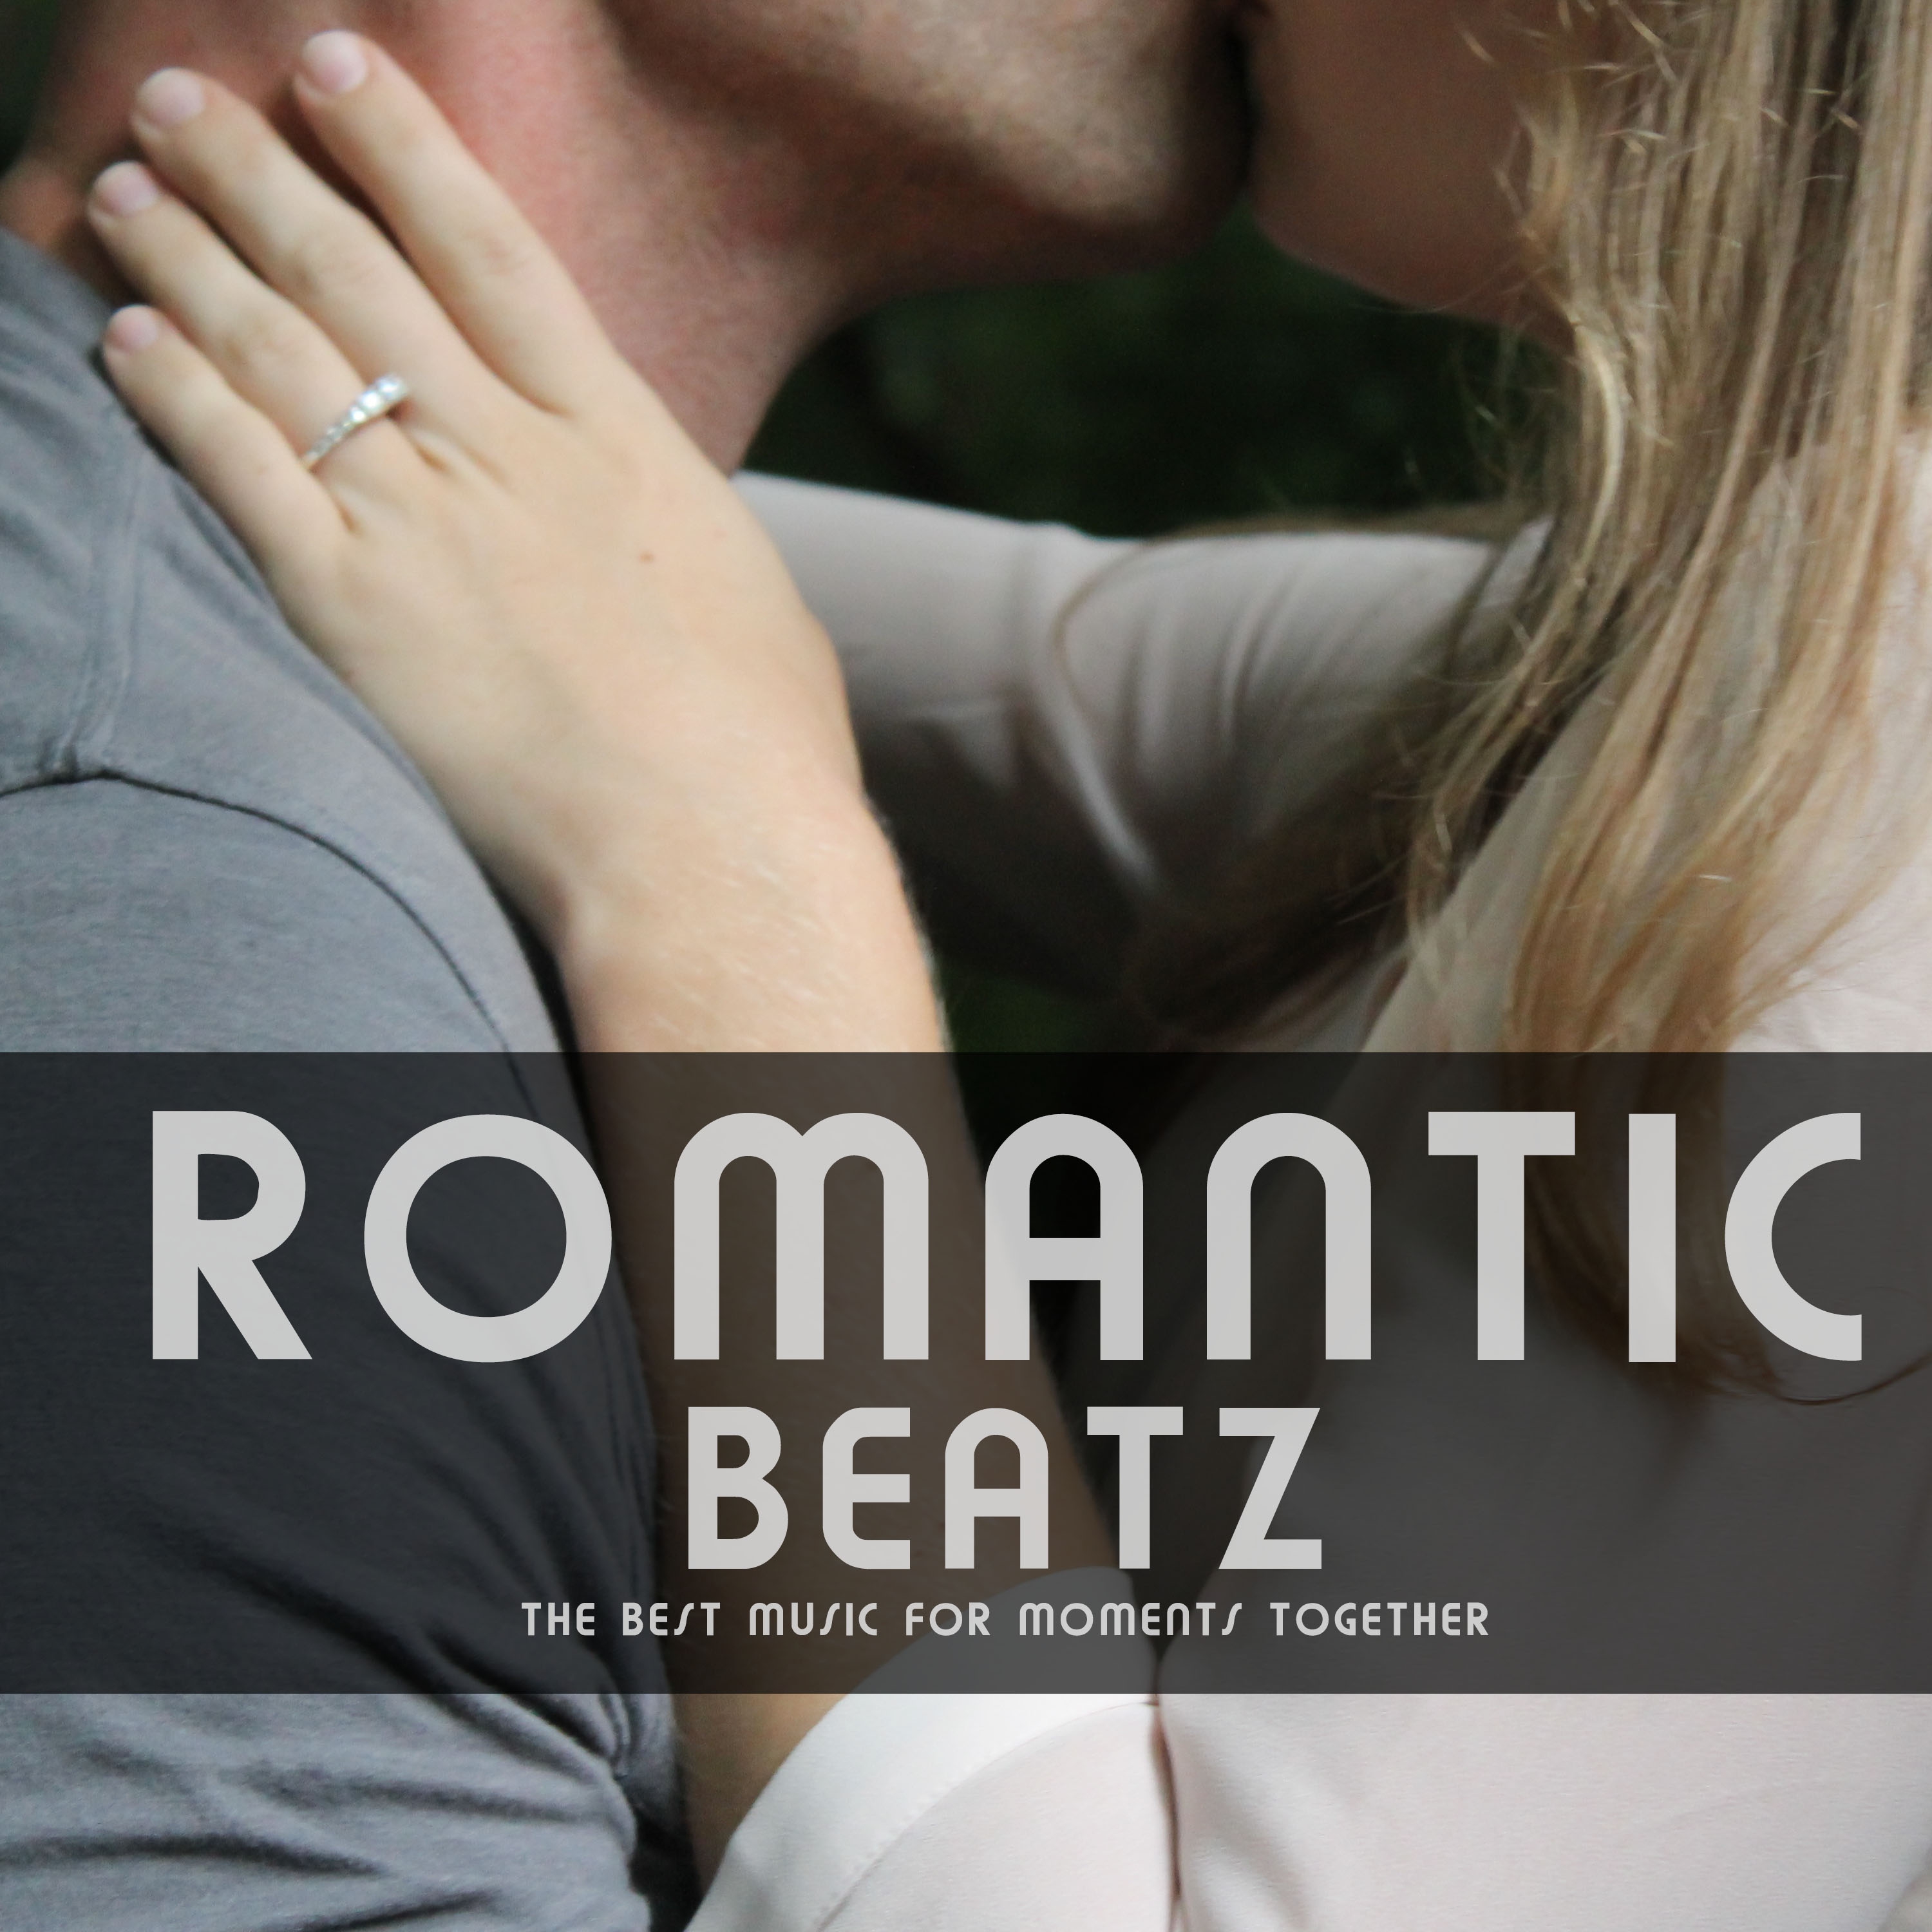 Romantic Beatz (The Best Music For Moments Together)